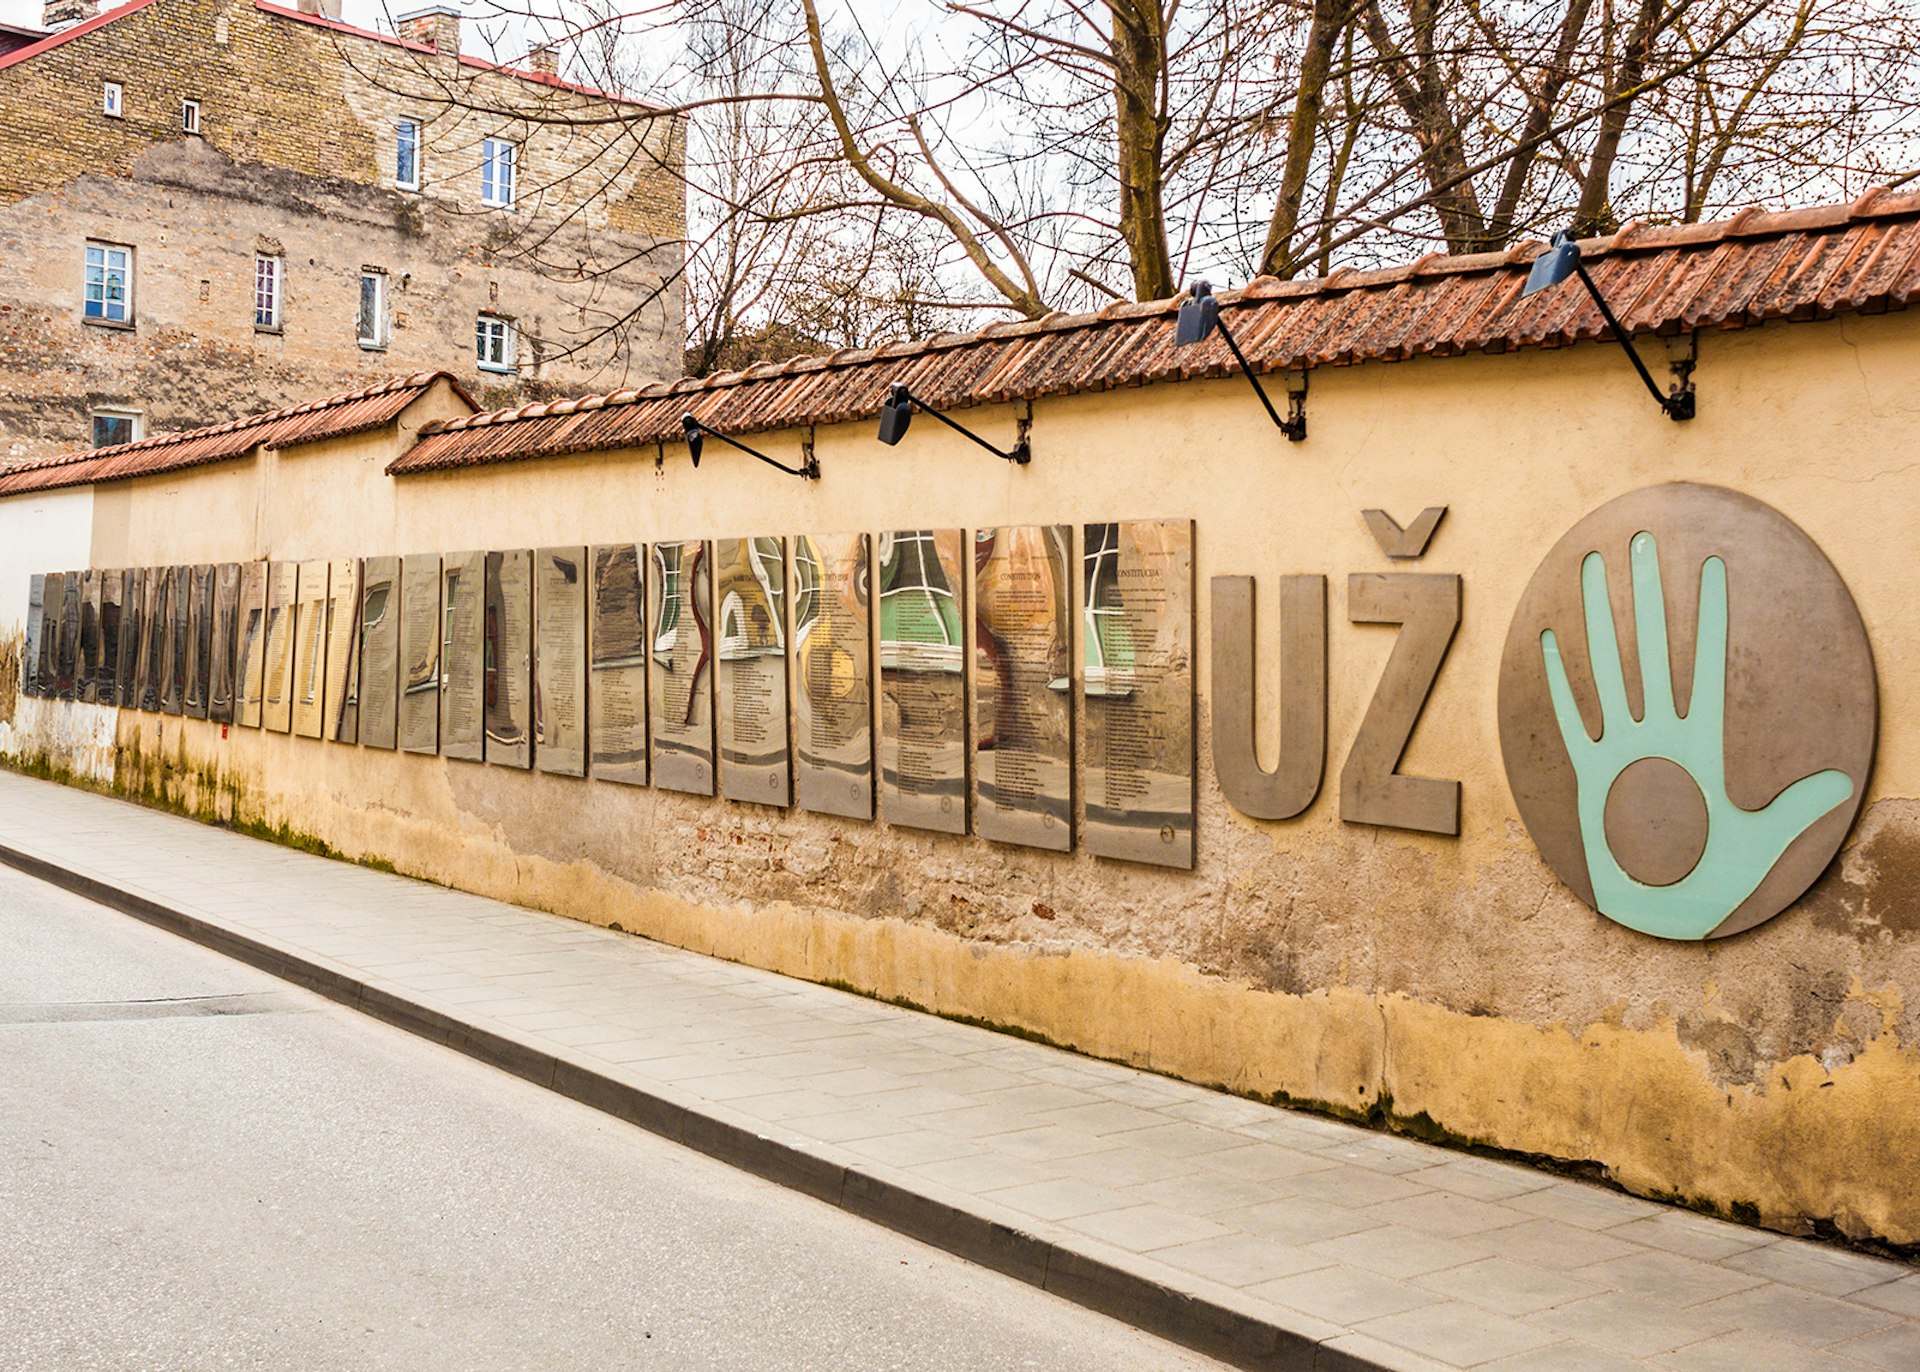 The constitution of the Republic of Uzupis written on the wall of a street in Vilnius, Lithuania © Anastasia Petrova / Shutterstock